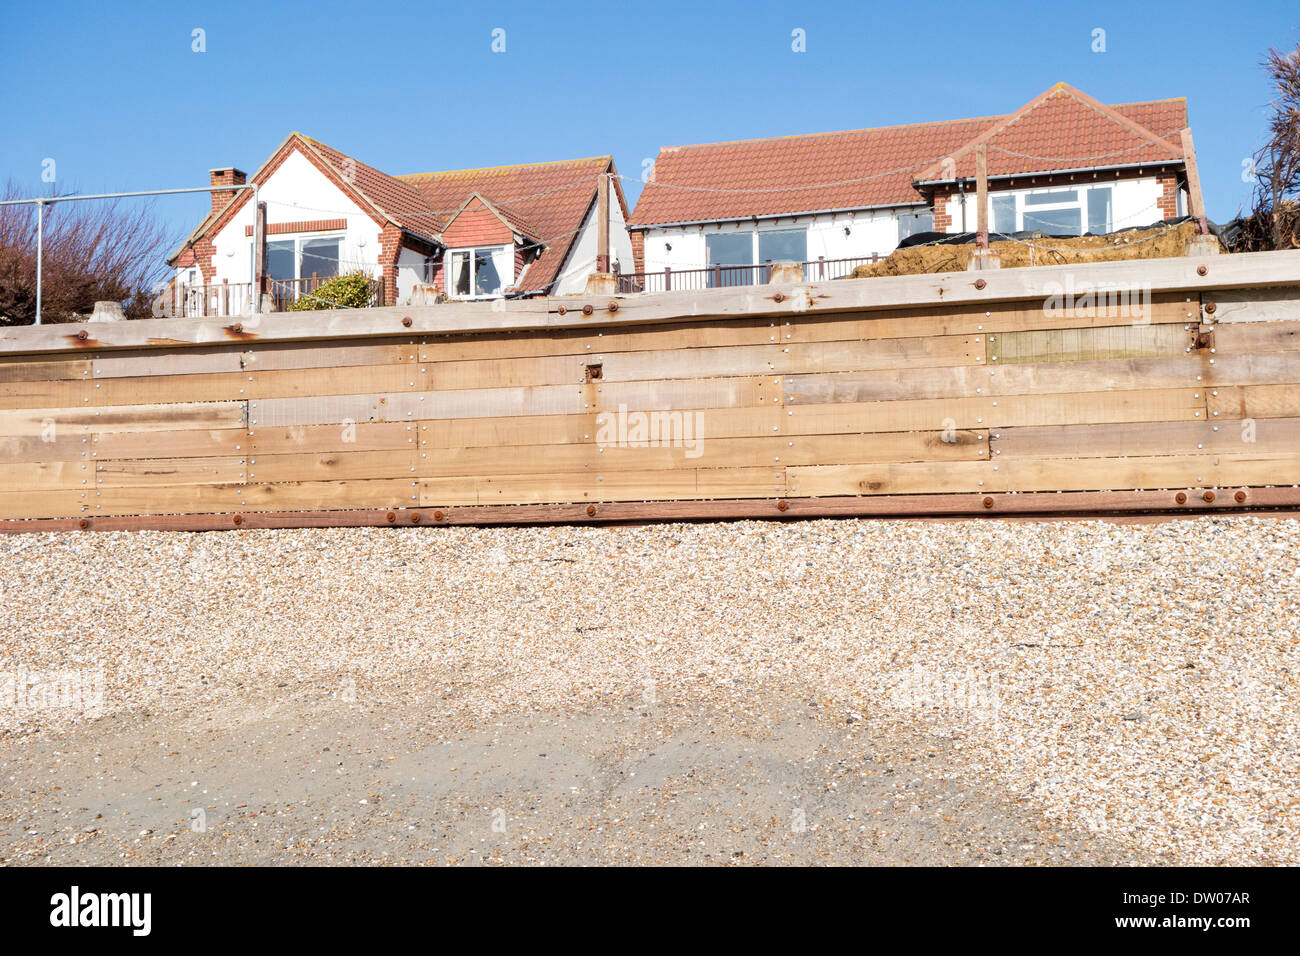 England, West Sussex, West Wittering. A newly installed timber seawall forms part of the coastal flood defence system Stock Photo